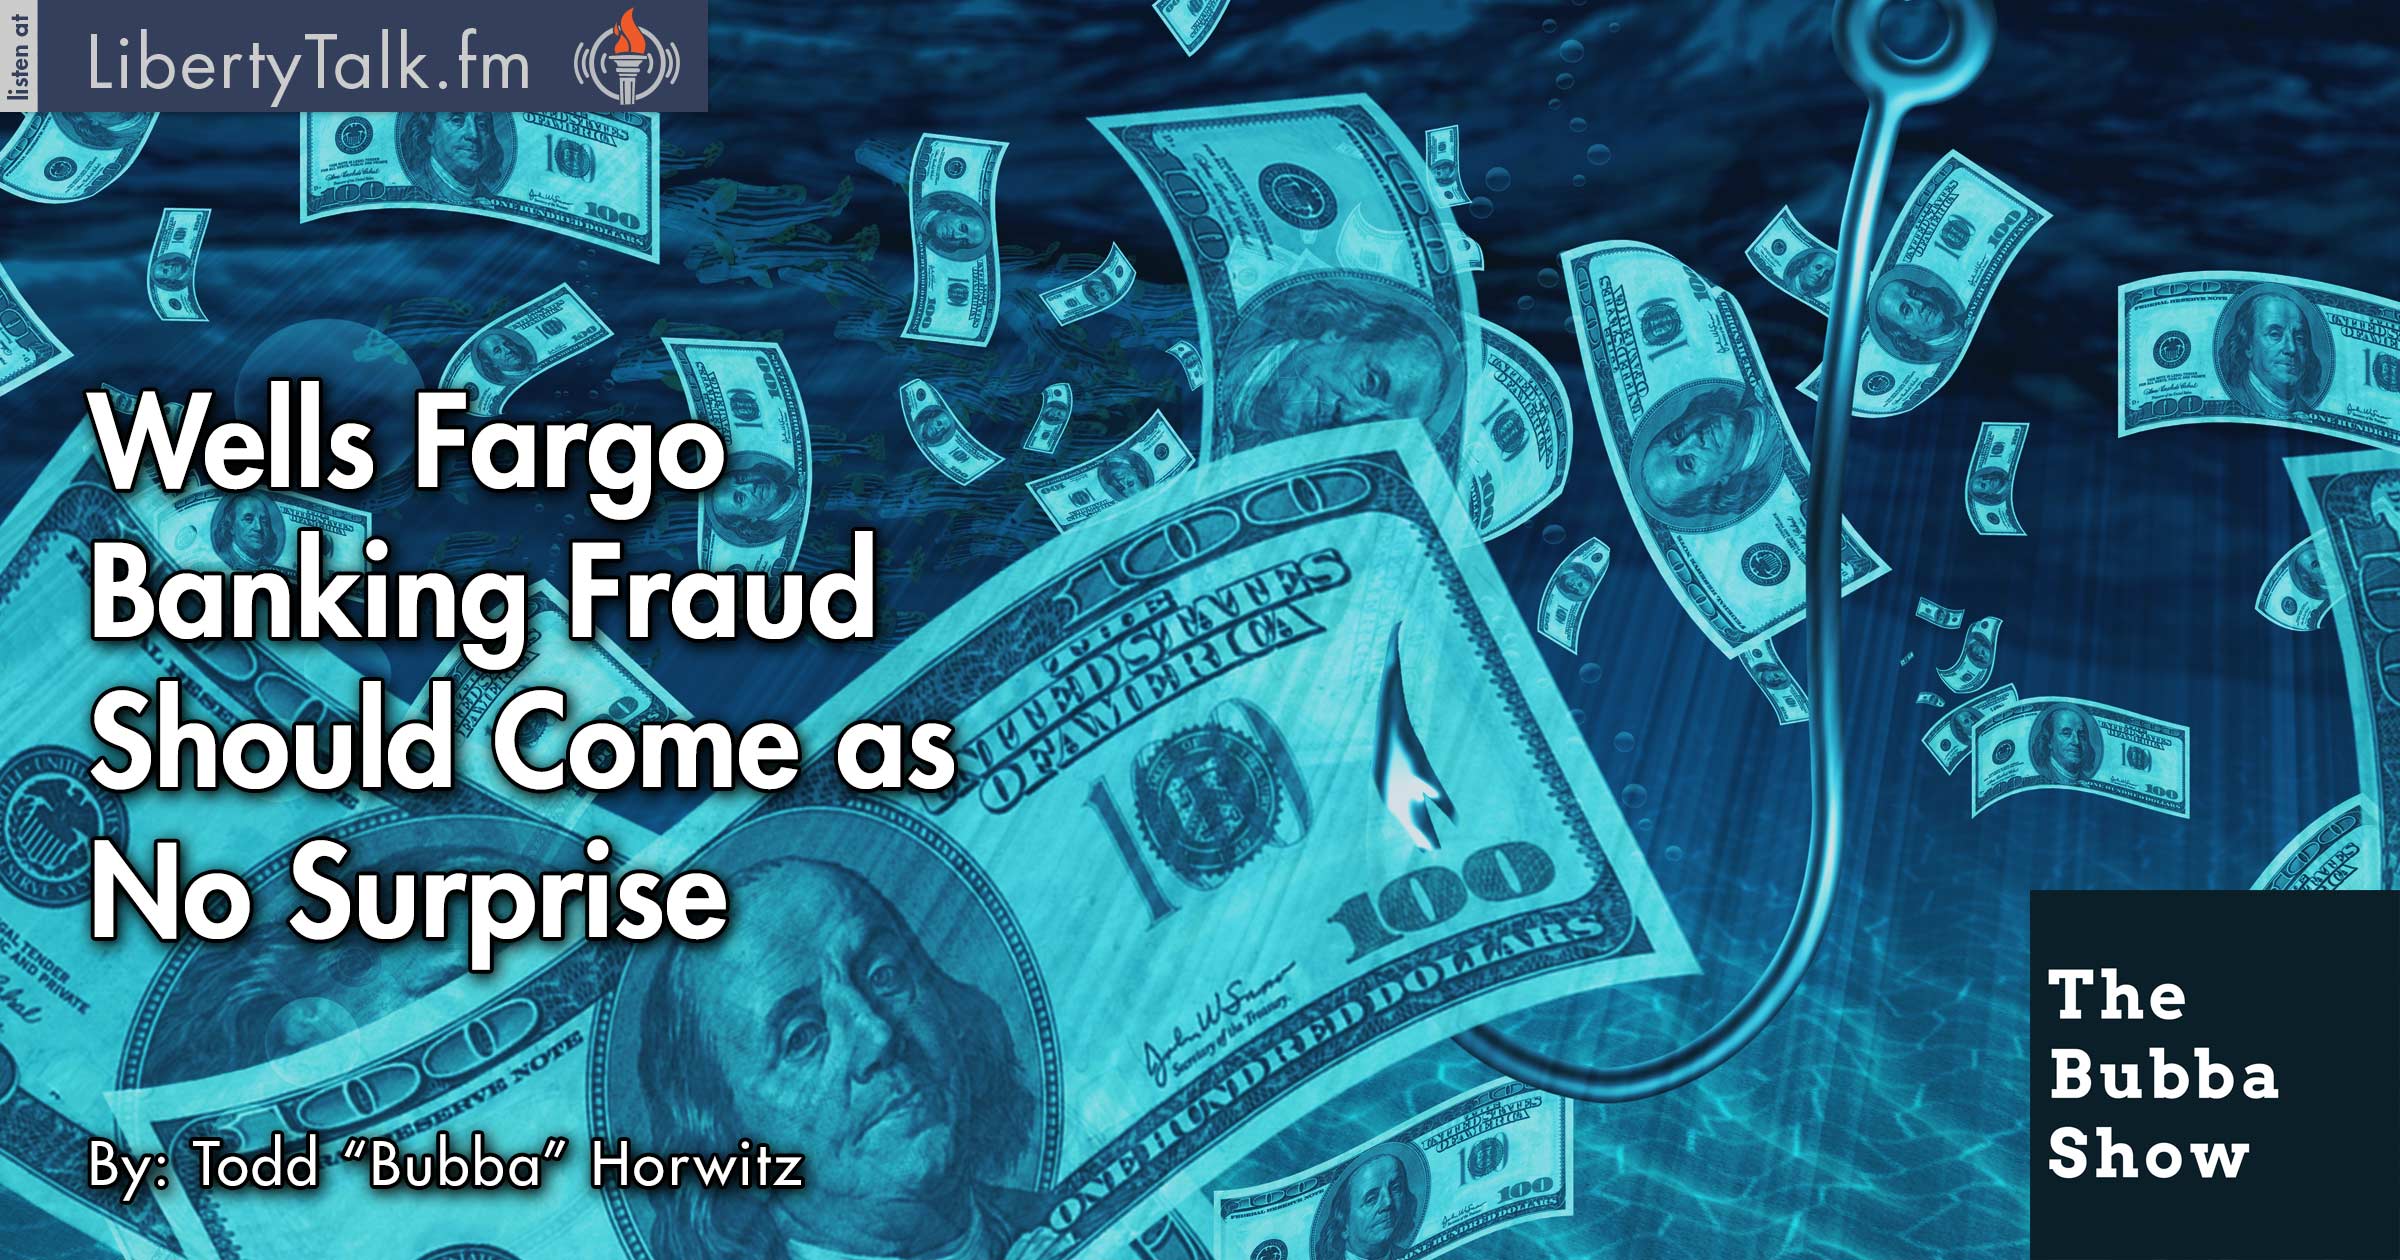 Wells Fargo Banking Fraud Should Come as No Surprise - The Bubba Show